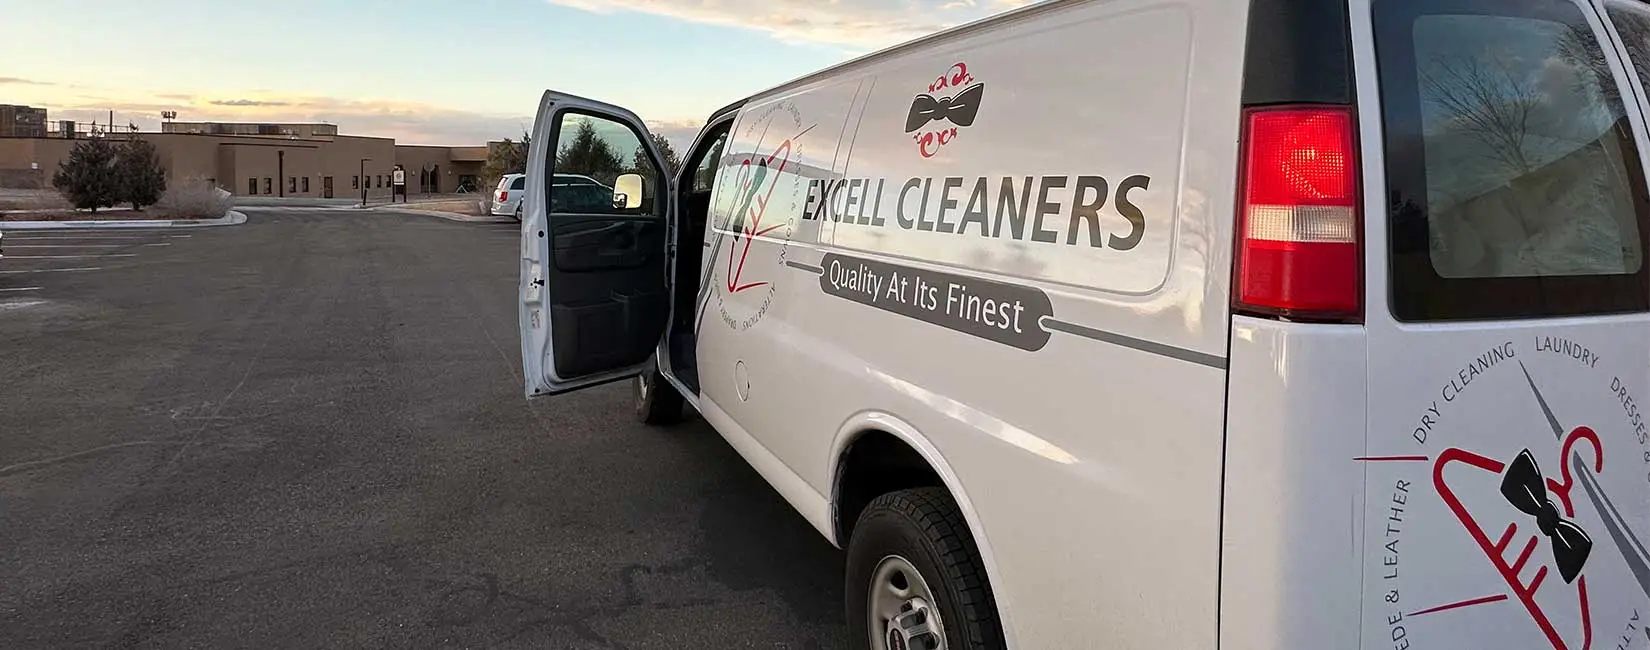 Dry Cleaner Pickup & Delivery in Albuquerque area